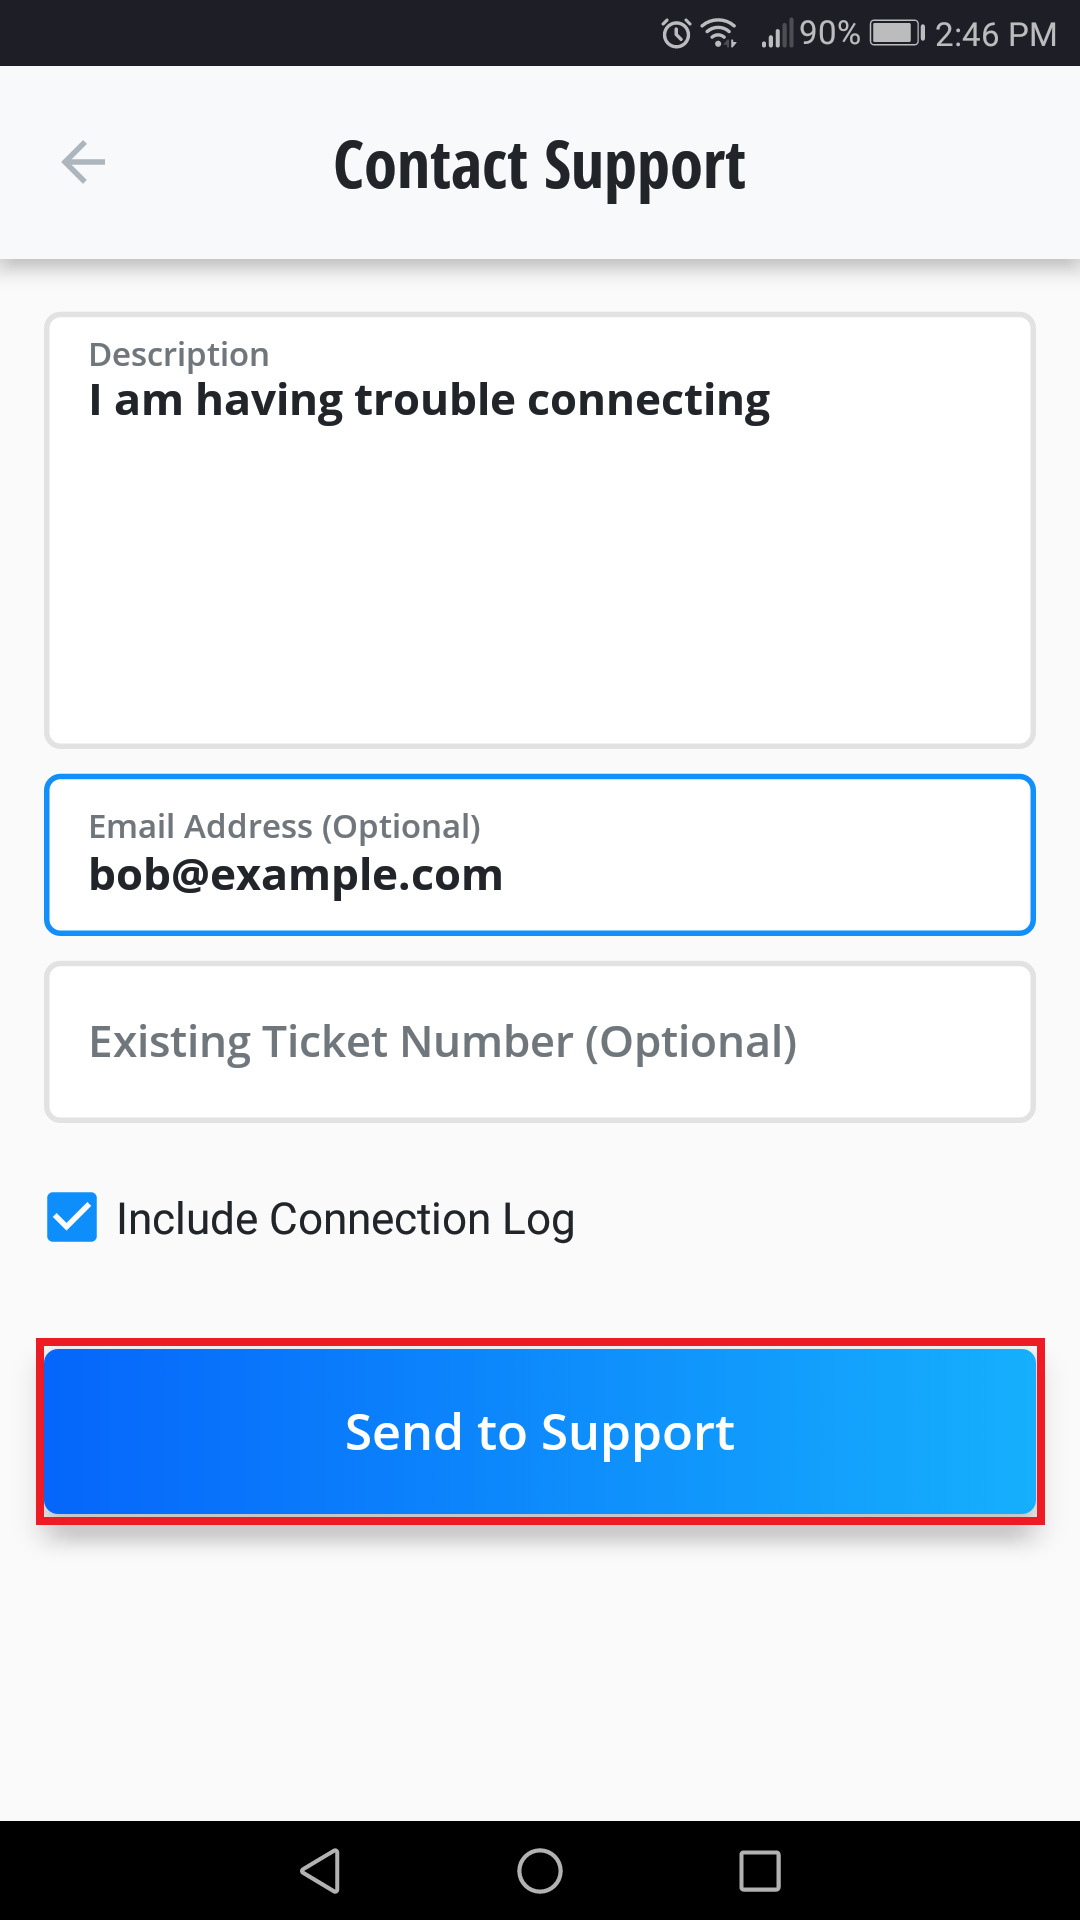 Vypr_App _-_ Contact_Support_Screen _-_ Send_to_Support_Selected.png